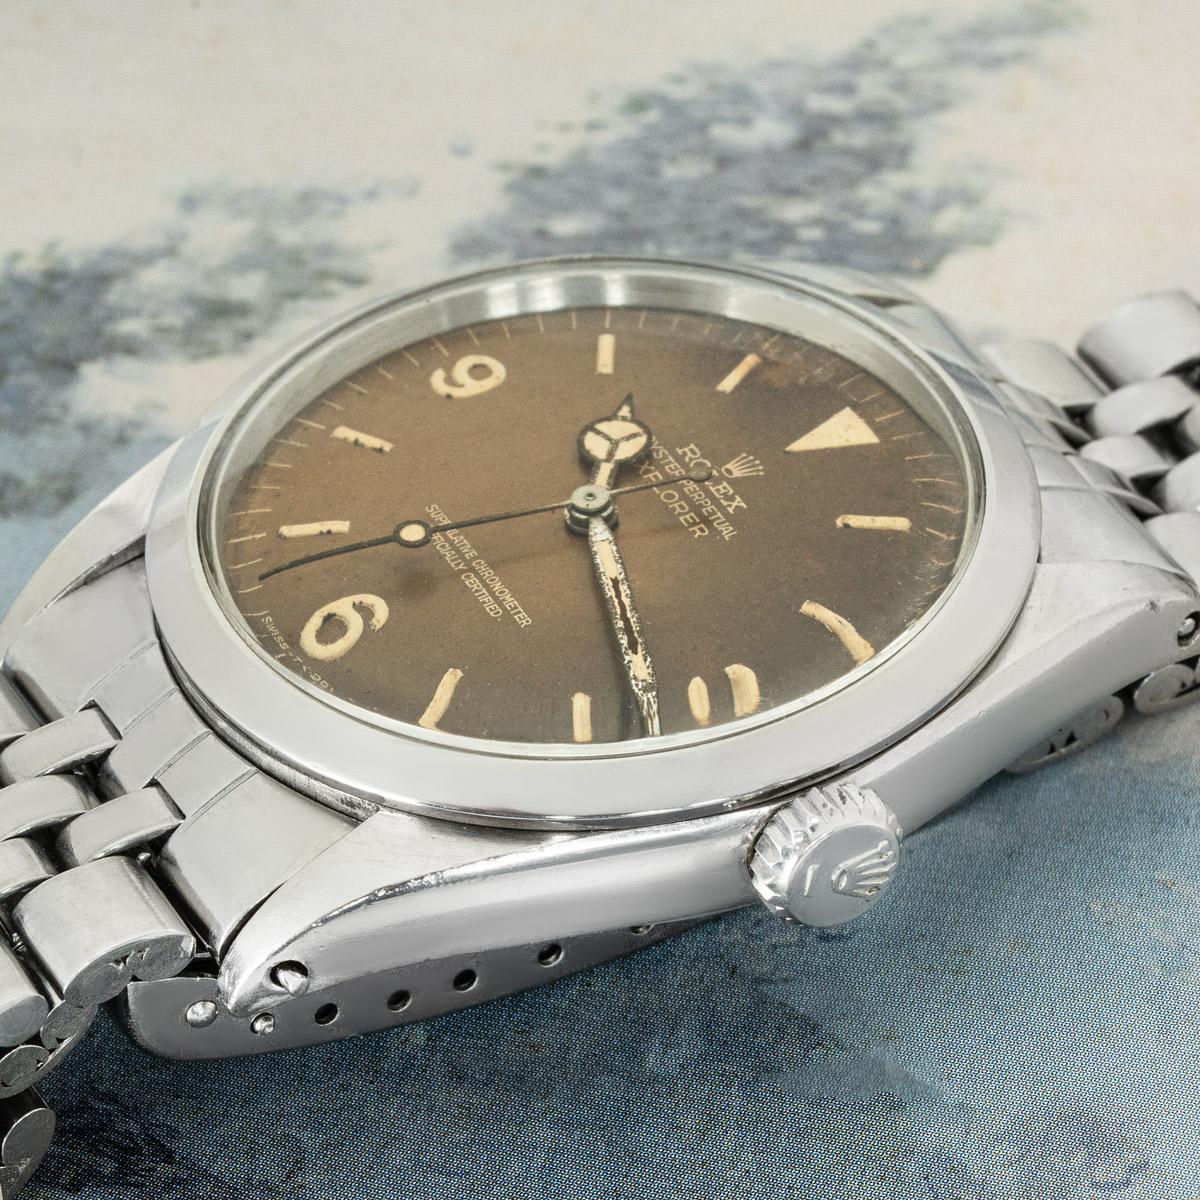 A 36mm, vintage Rolex Explorer in stainless steel. Featuring a distinctive rare tropical dial with arabic numbers and a smooth, fixed stainless steel bezel. Fitted with a plexiglass, self-winding automatic movement and a Jubilee bracelet equipped